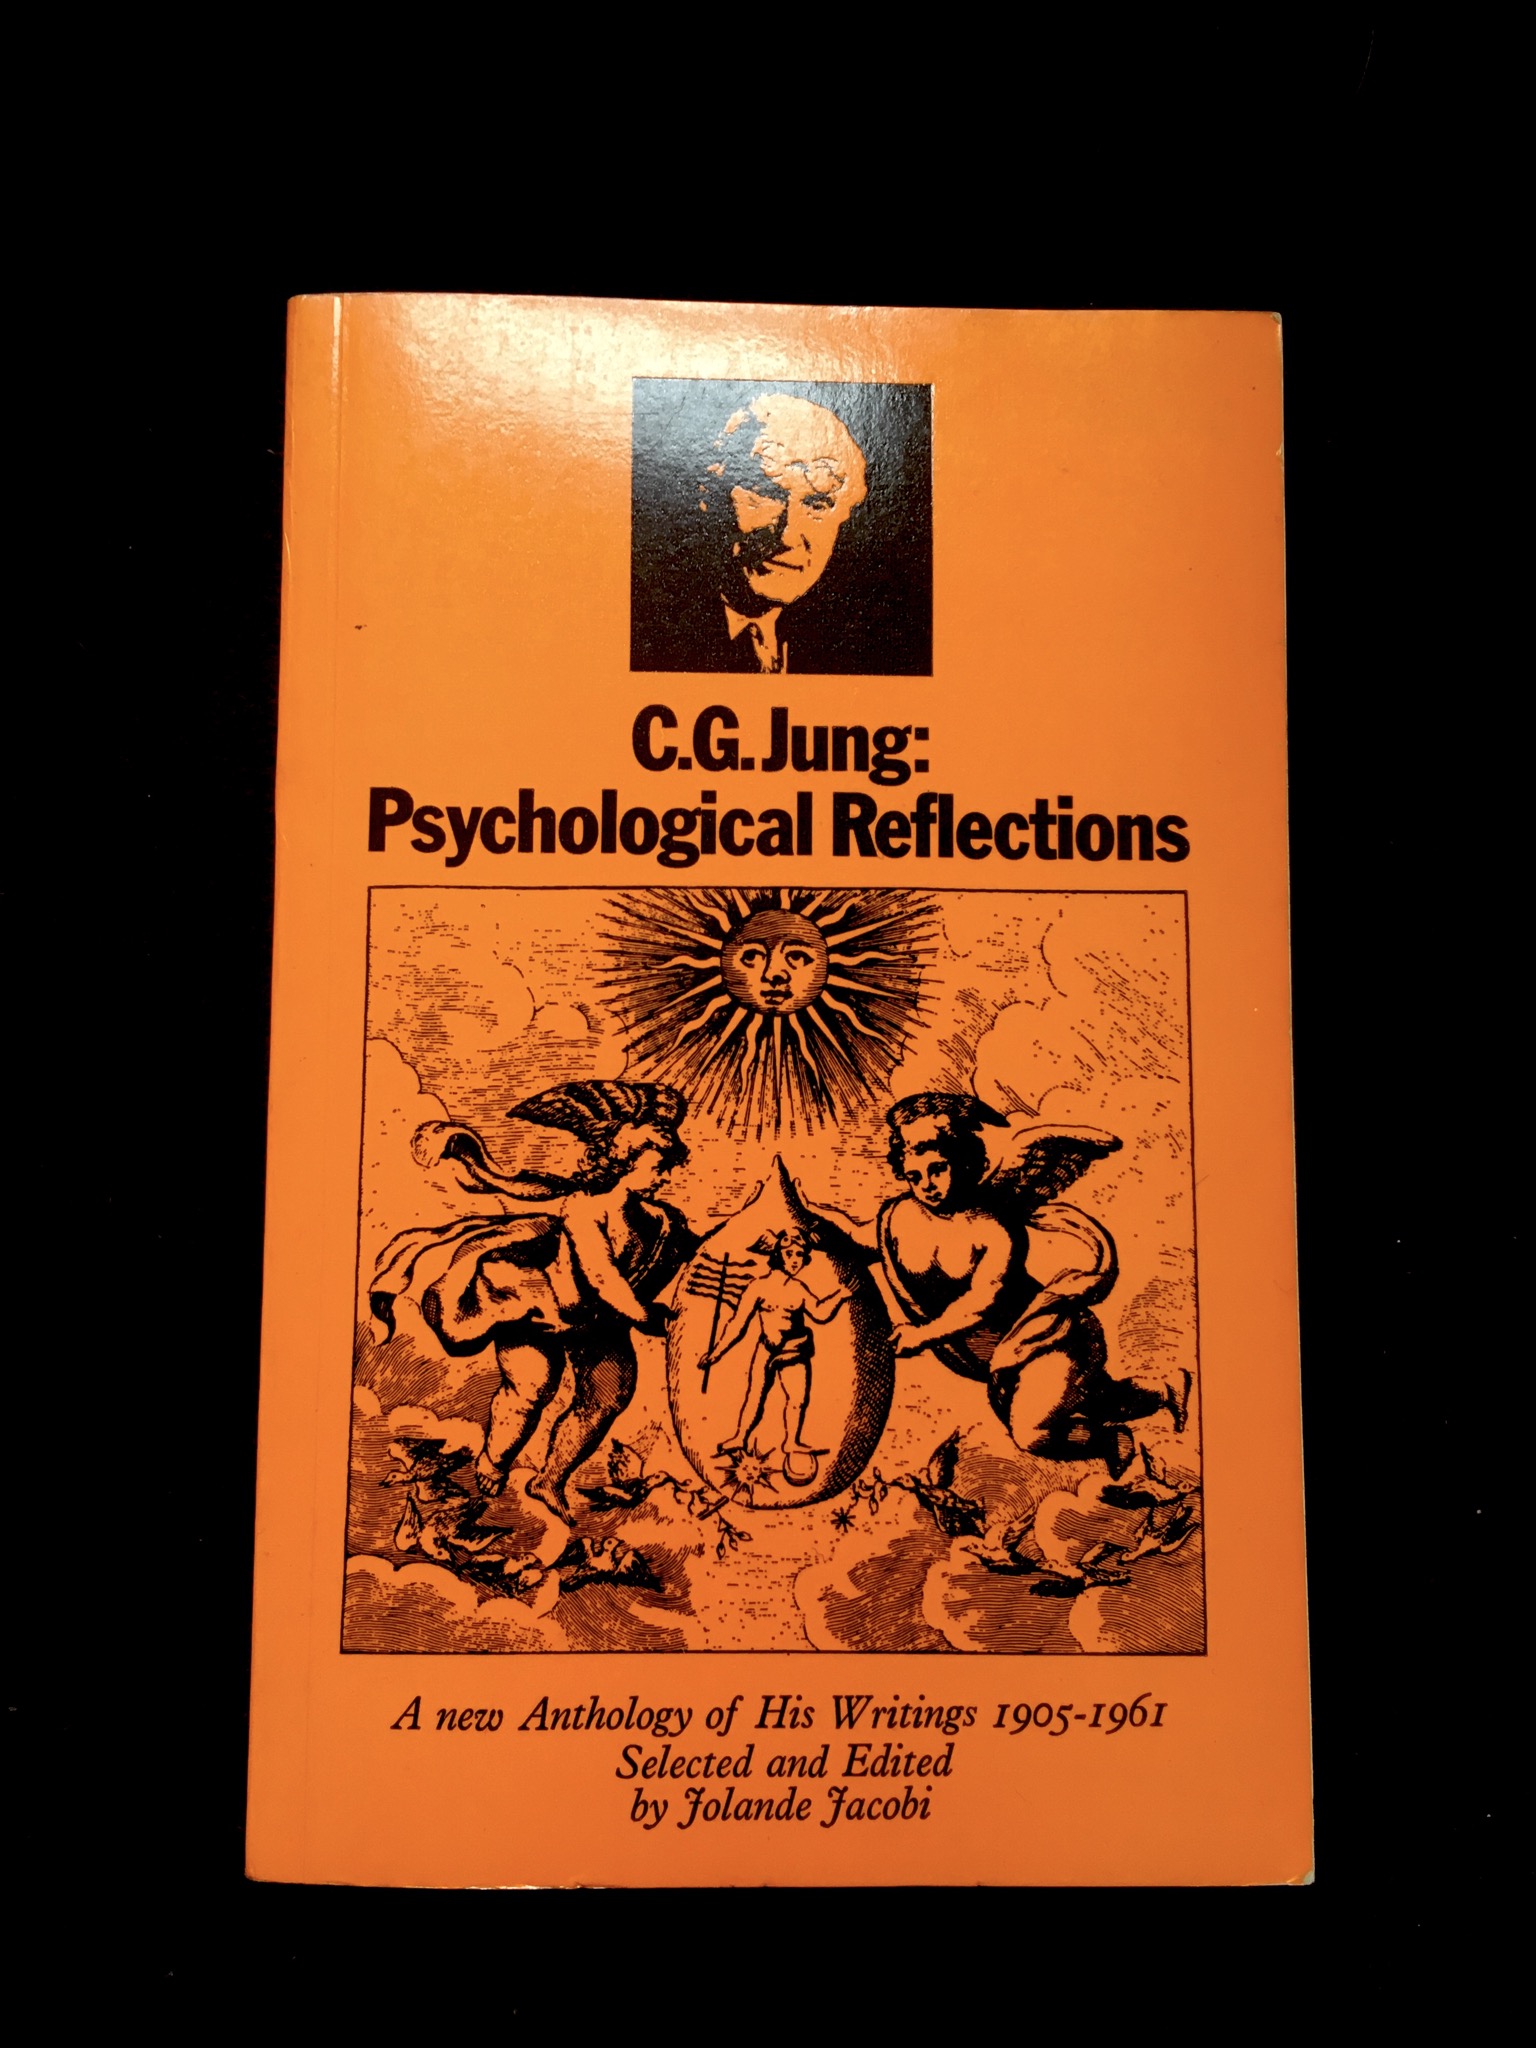 Psychological Reflections by C.G Jung